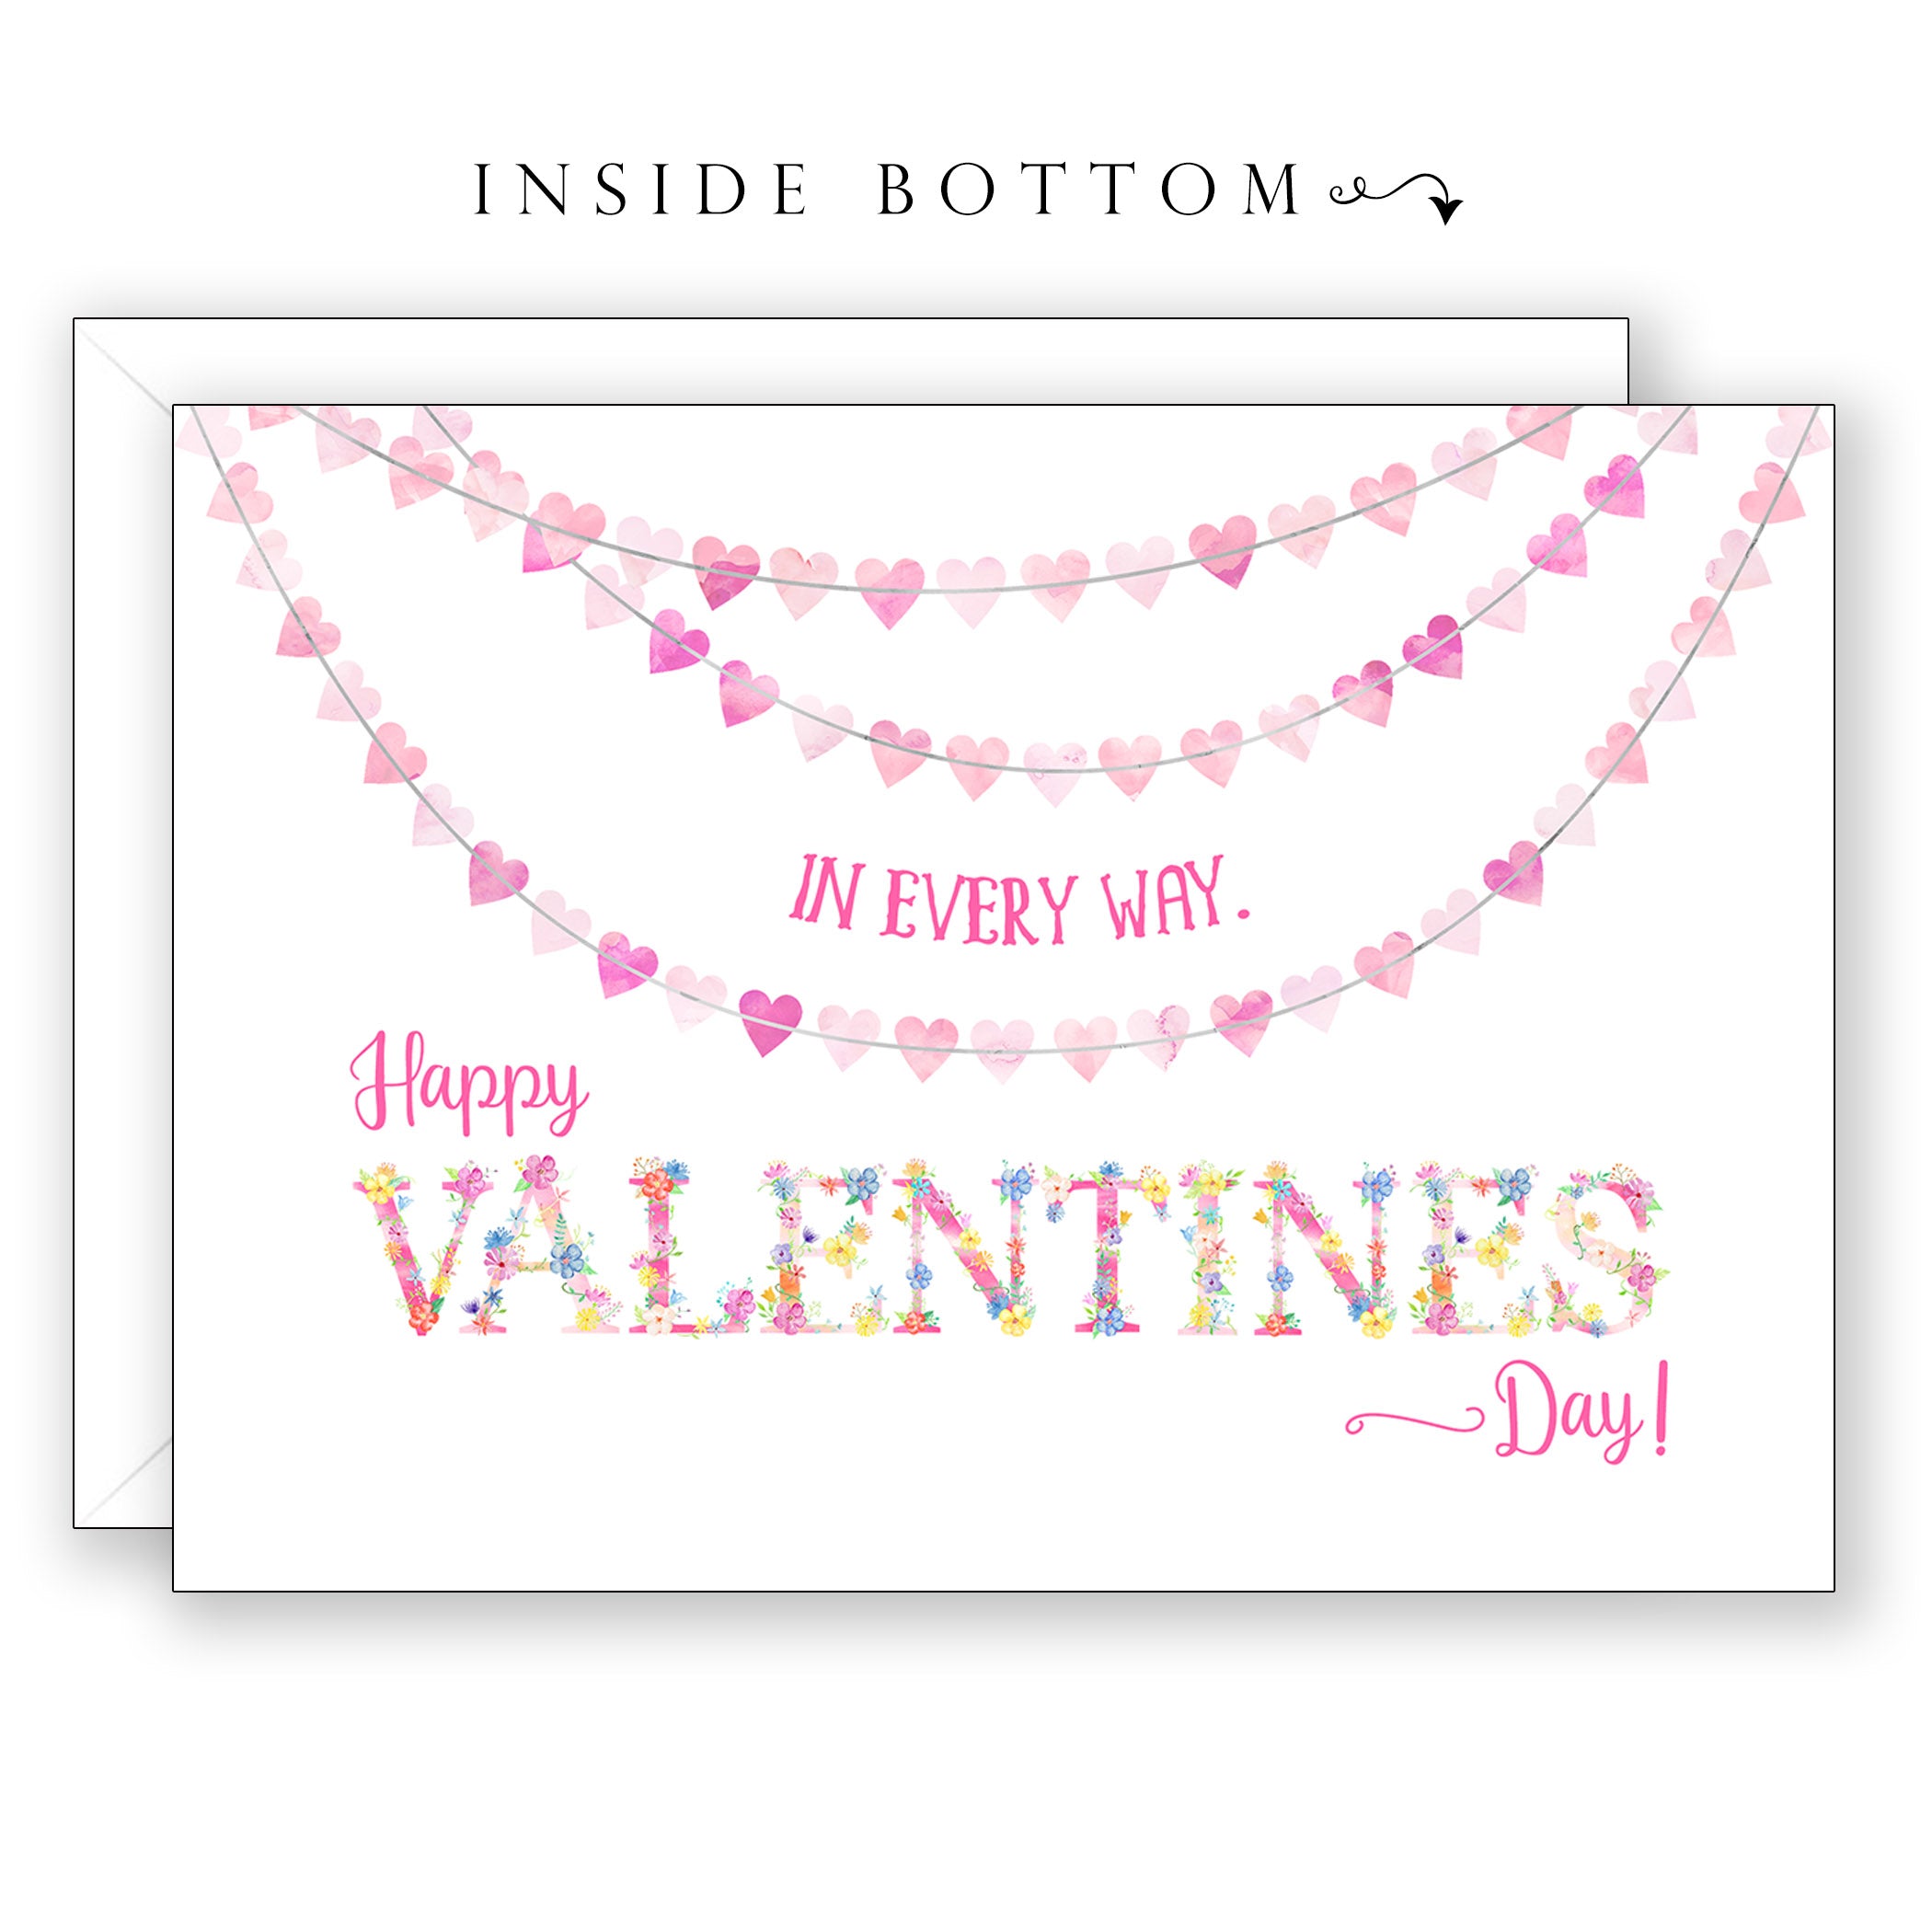 So Loved - Valentines Day Card